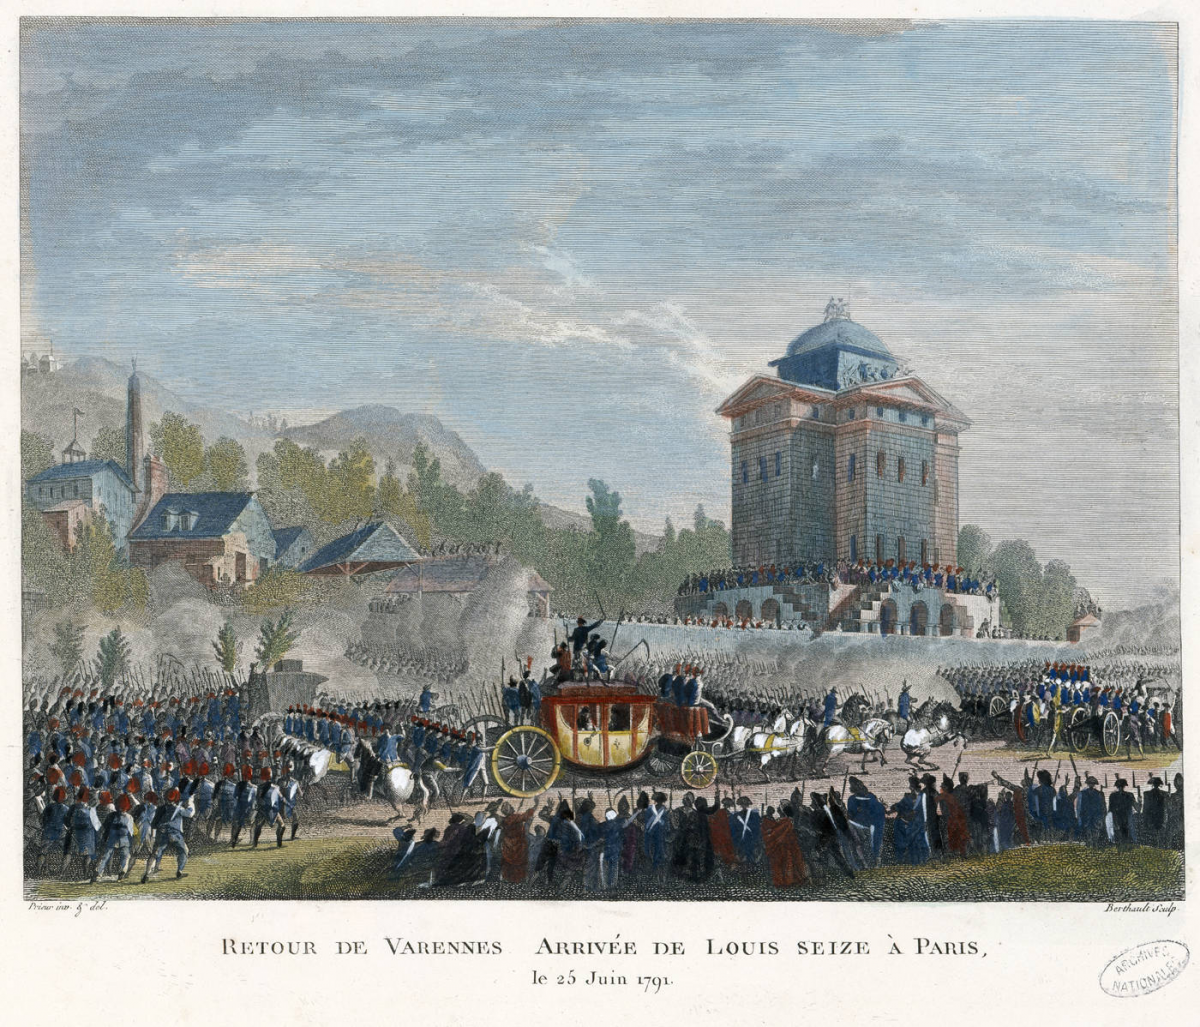 Colorized version of Jean-Louis Prieur's drawing depicting the return of the royal family from Varennes to Paris, following their attempt to flee to the Austrian Netherlands in June 1791